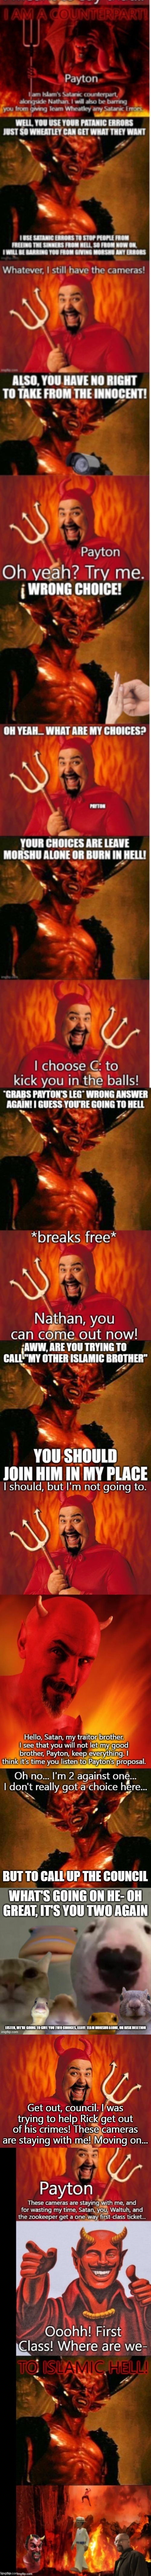 Payton and Nathan will keep Satan, Zookeeper, and Walter in Islamic hell any way they see fit | Get out, council. I was trying to help Rick get out of his crimes! These cameras are staying with me! Moving on... | image tagged in funny satan | made w/ Imgflip meme maker